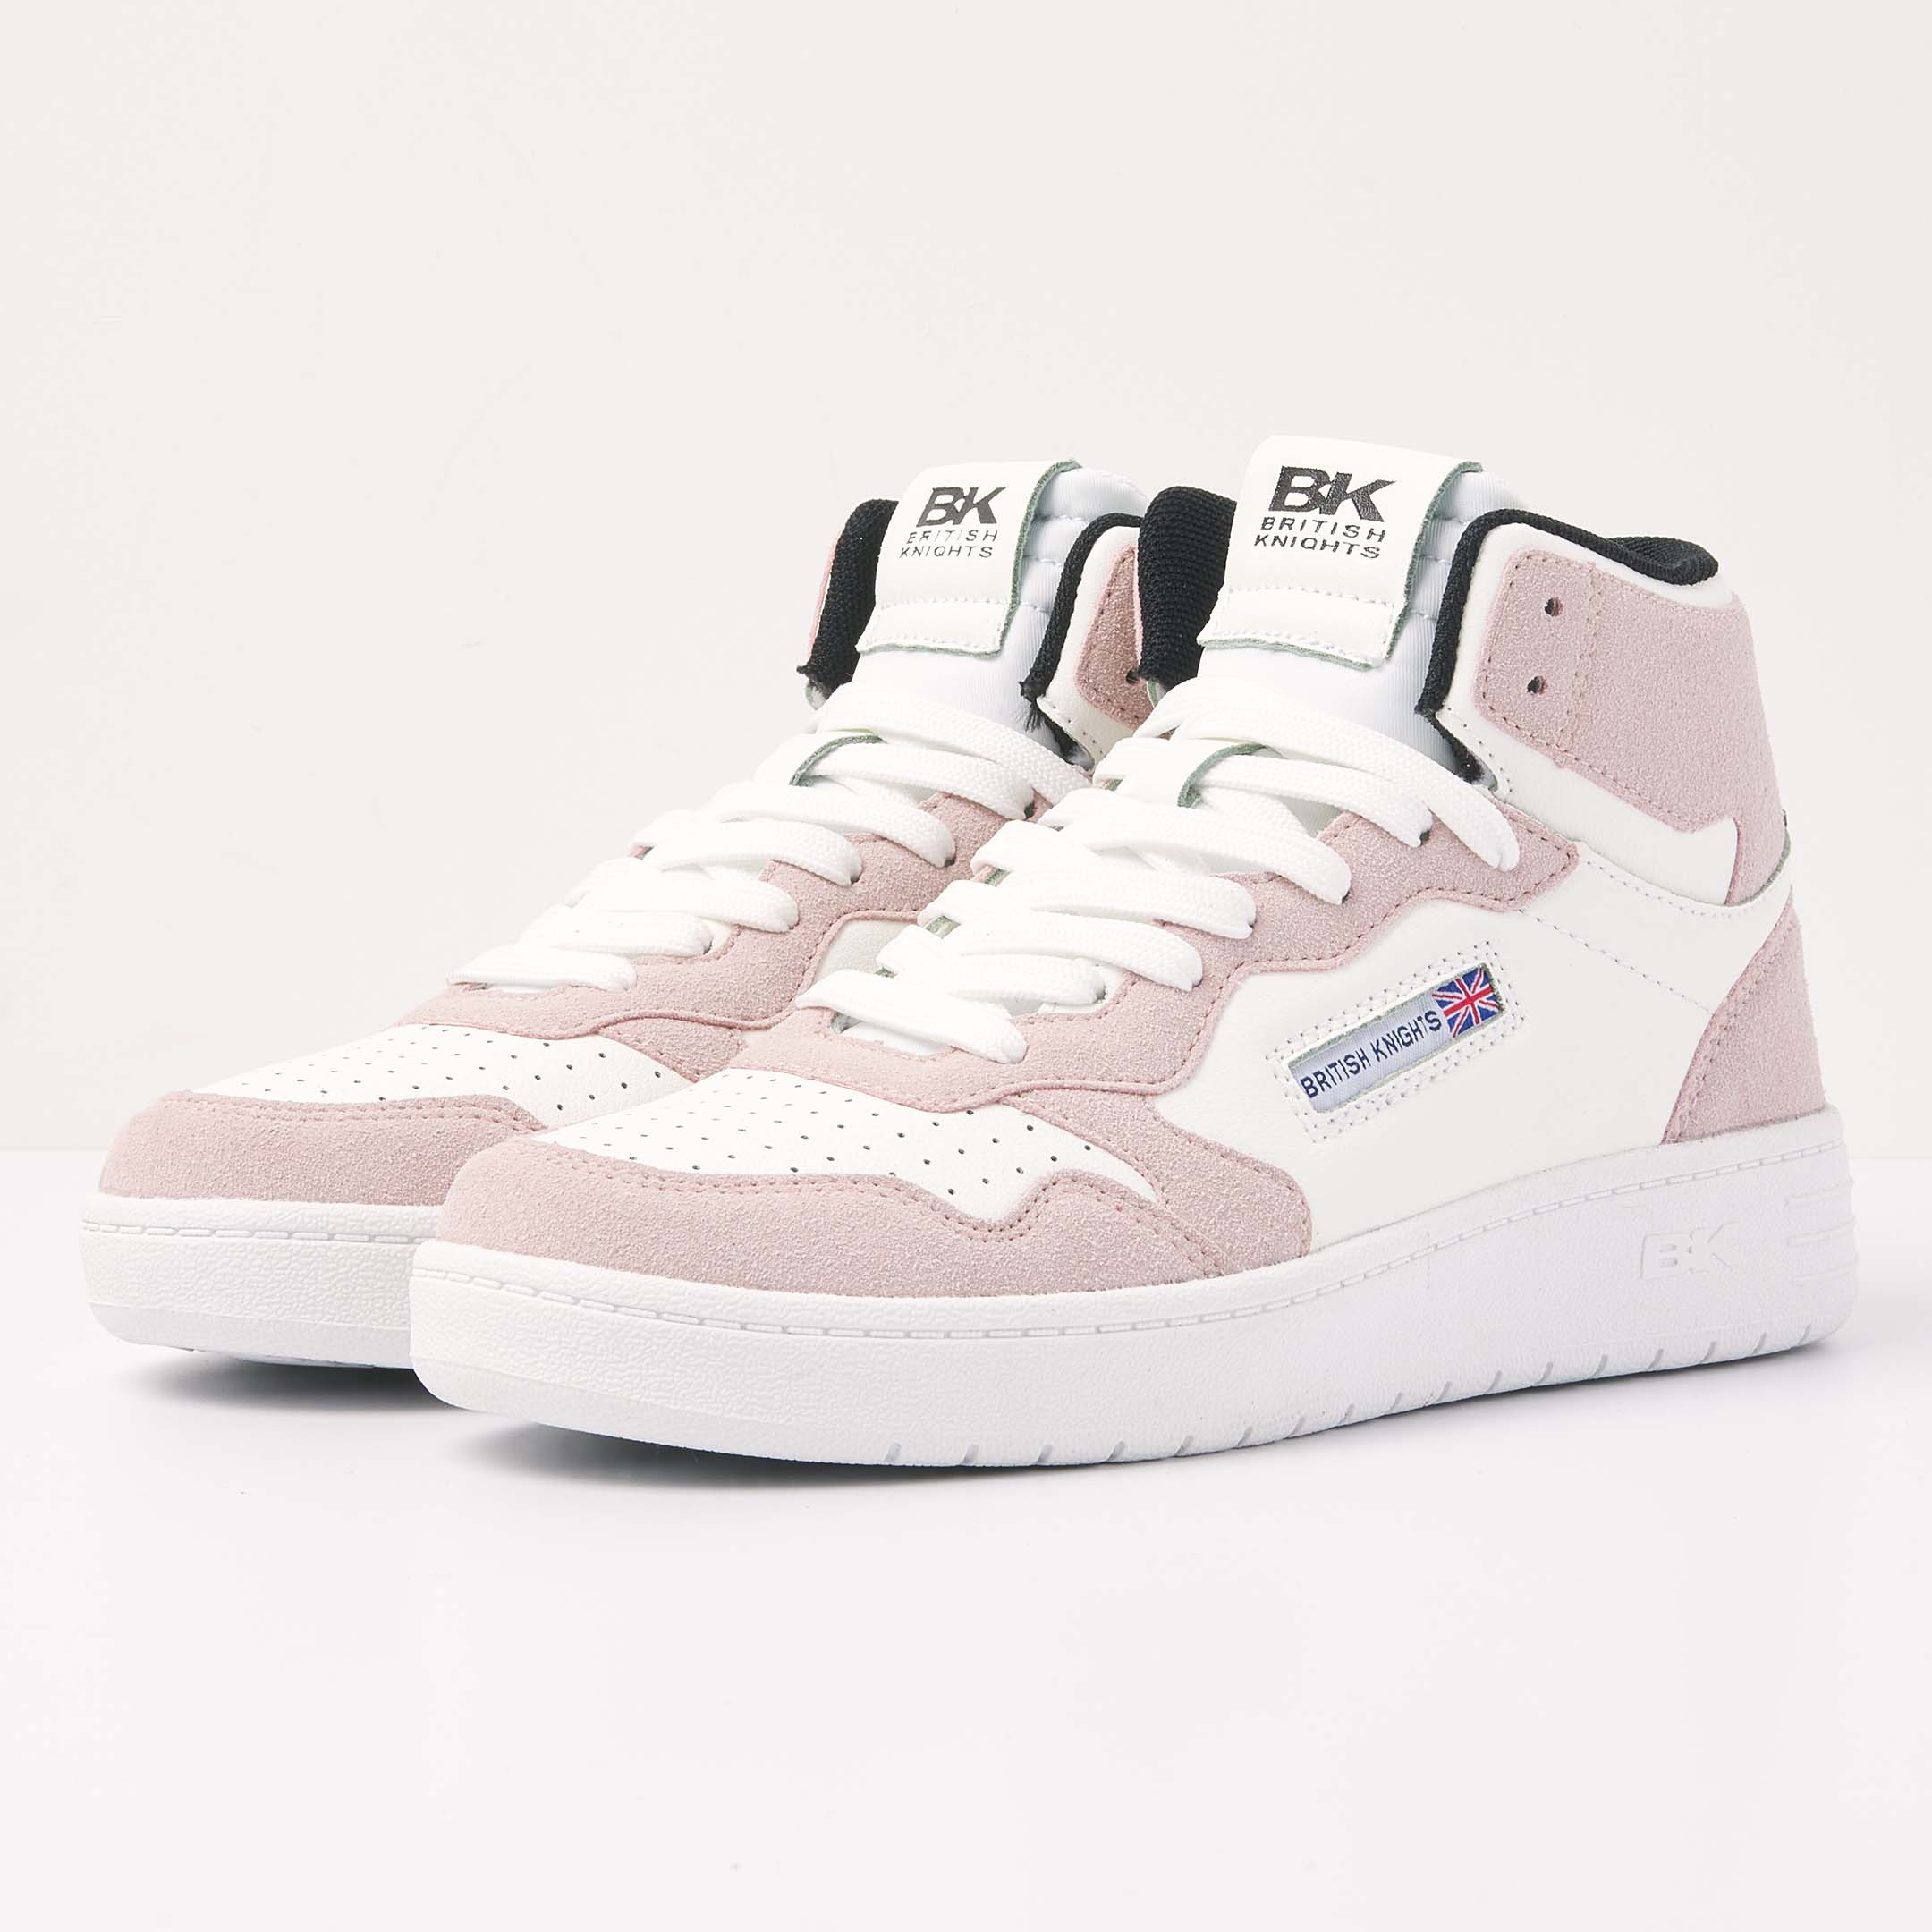 British Knights Sneaker Front view  B52-3616-02 NOORS MID HIGH-TOP FEMALE